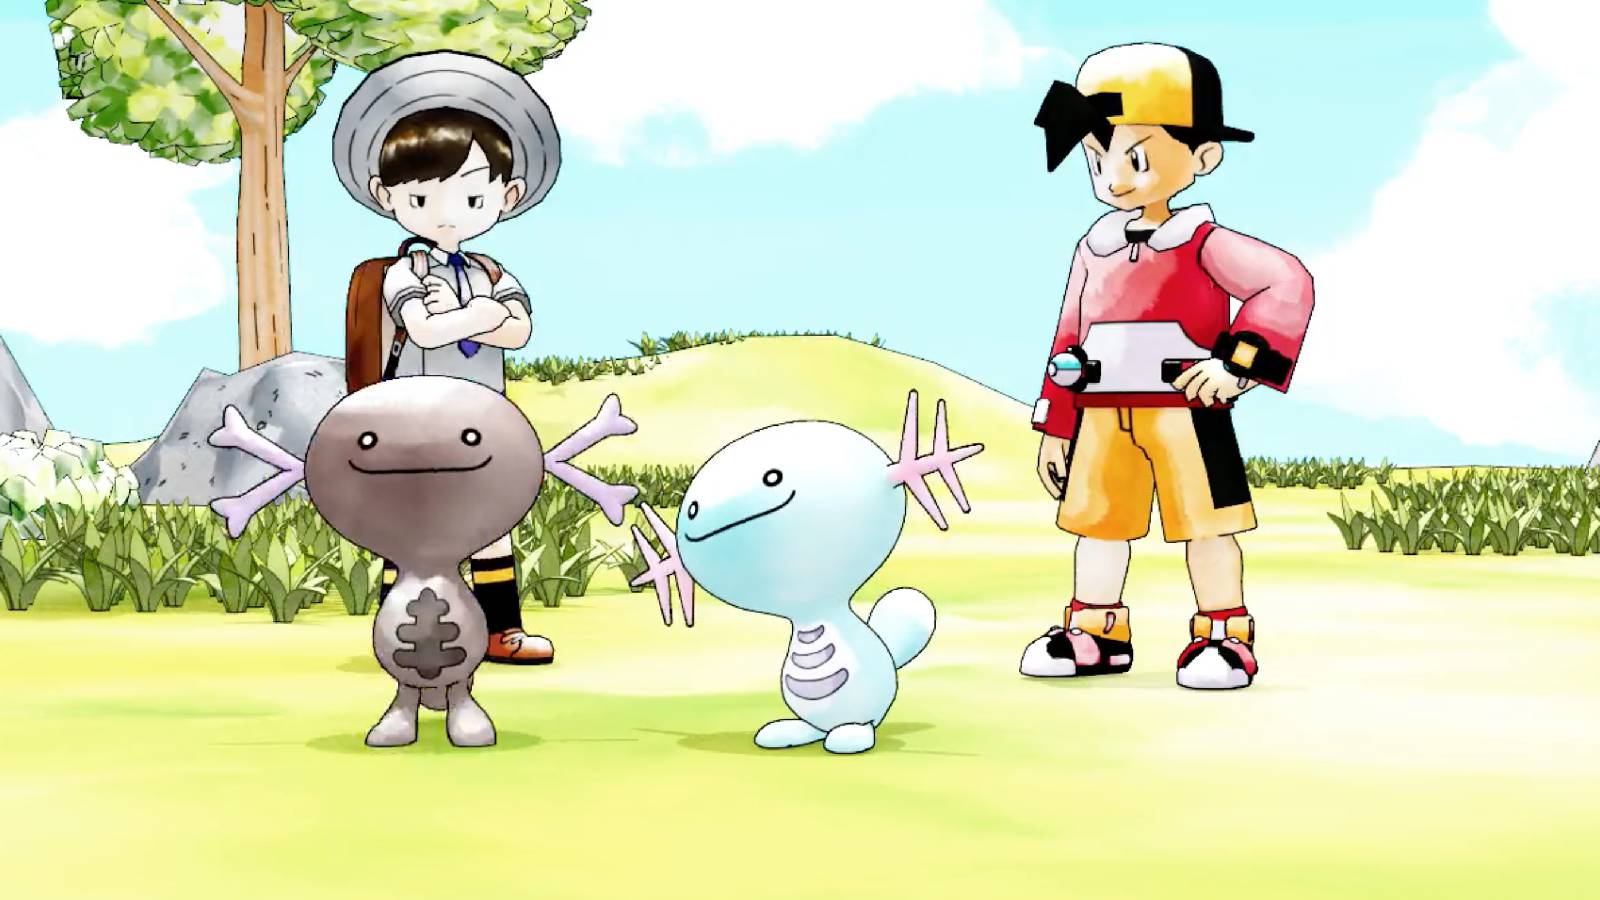 A Pokemon fan project shows a 3D game using the original watercolor style of Ken Sugimori. Two Pokemon trainers stand by while their Wooper play